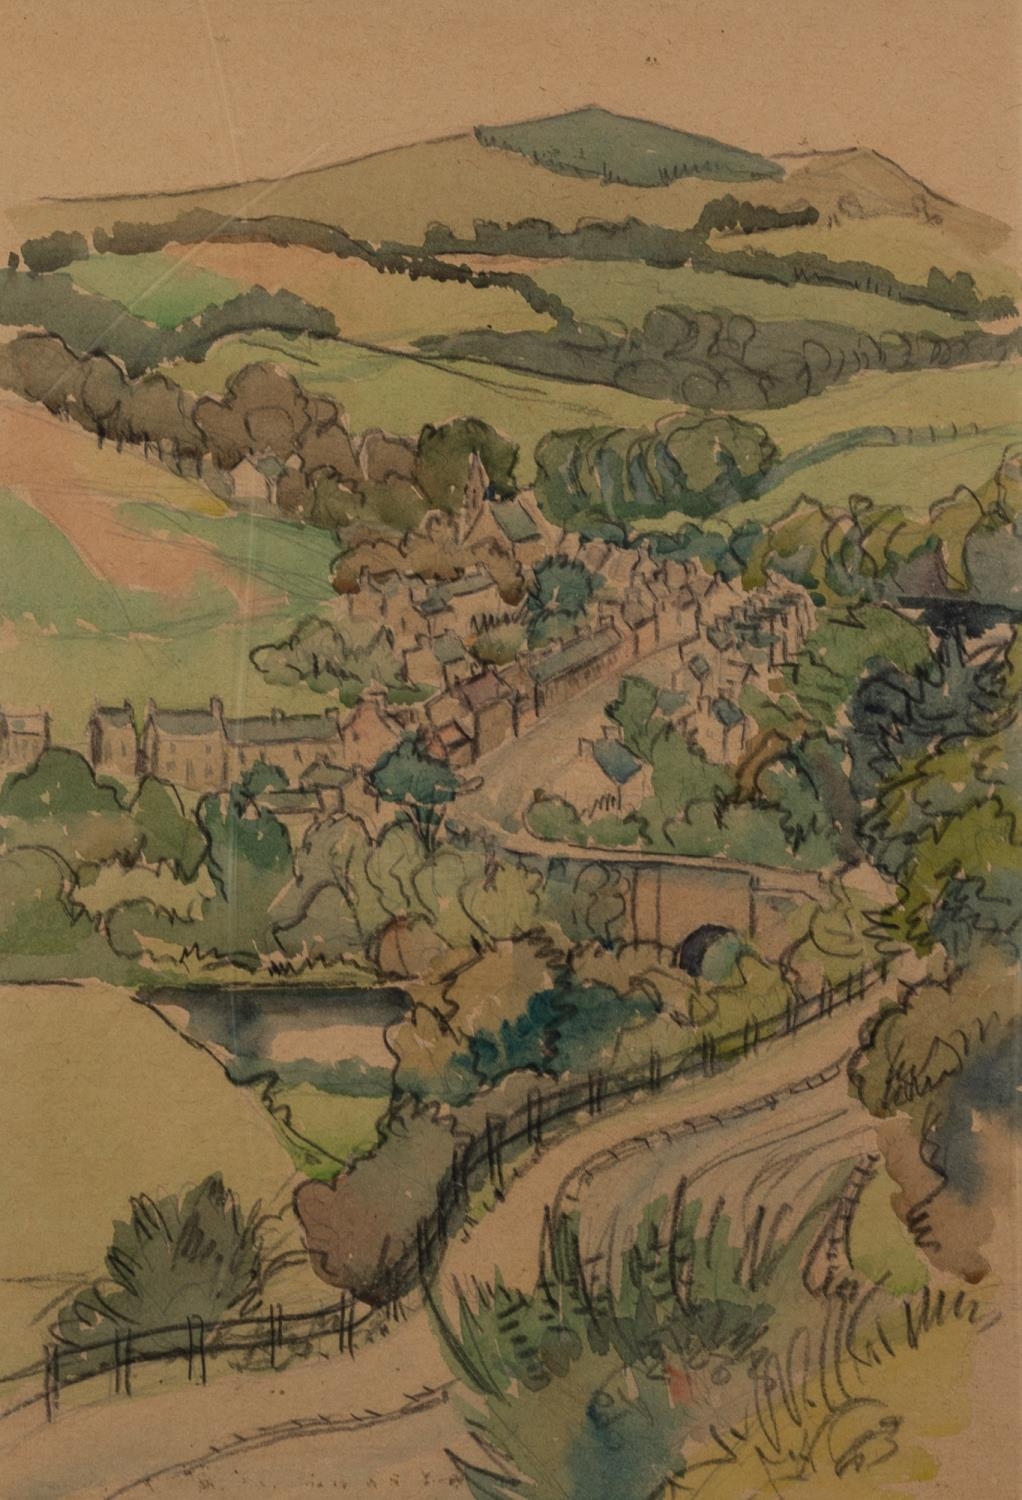 IAN GRANT (1904 - 1993) PENCIL AND WATERCOLOUR DRAWING Wooded Village Labelled verso 14 x 9 1/2in (